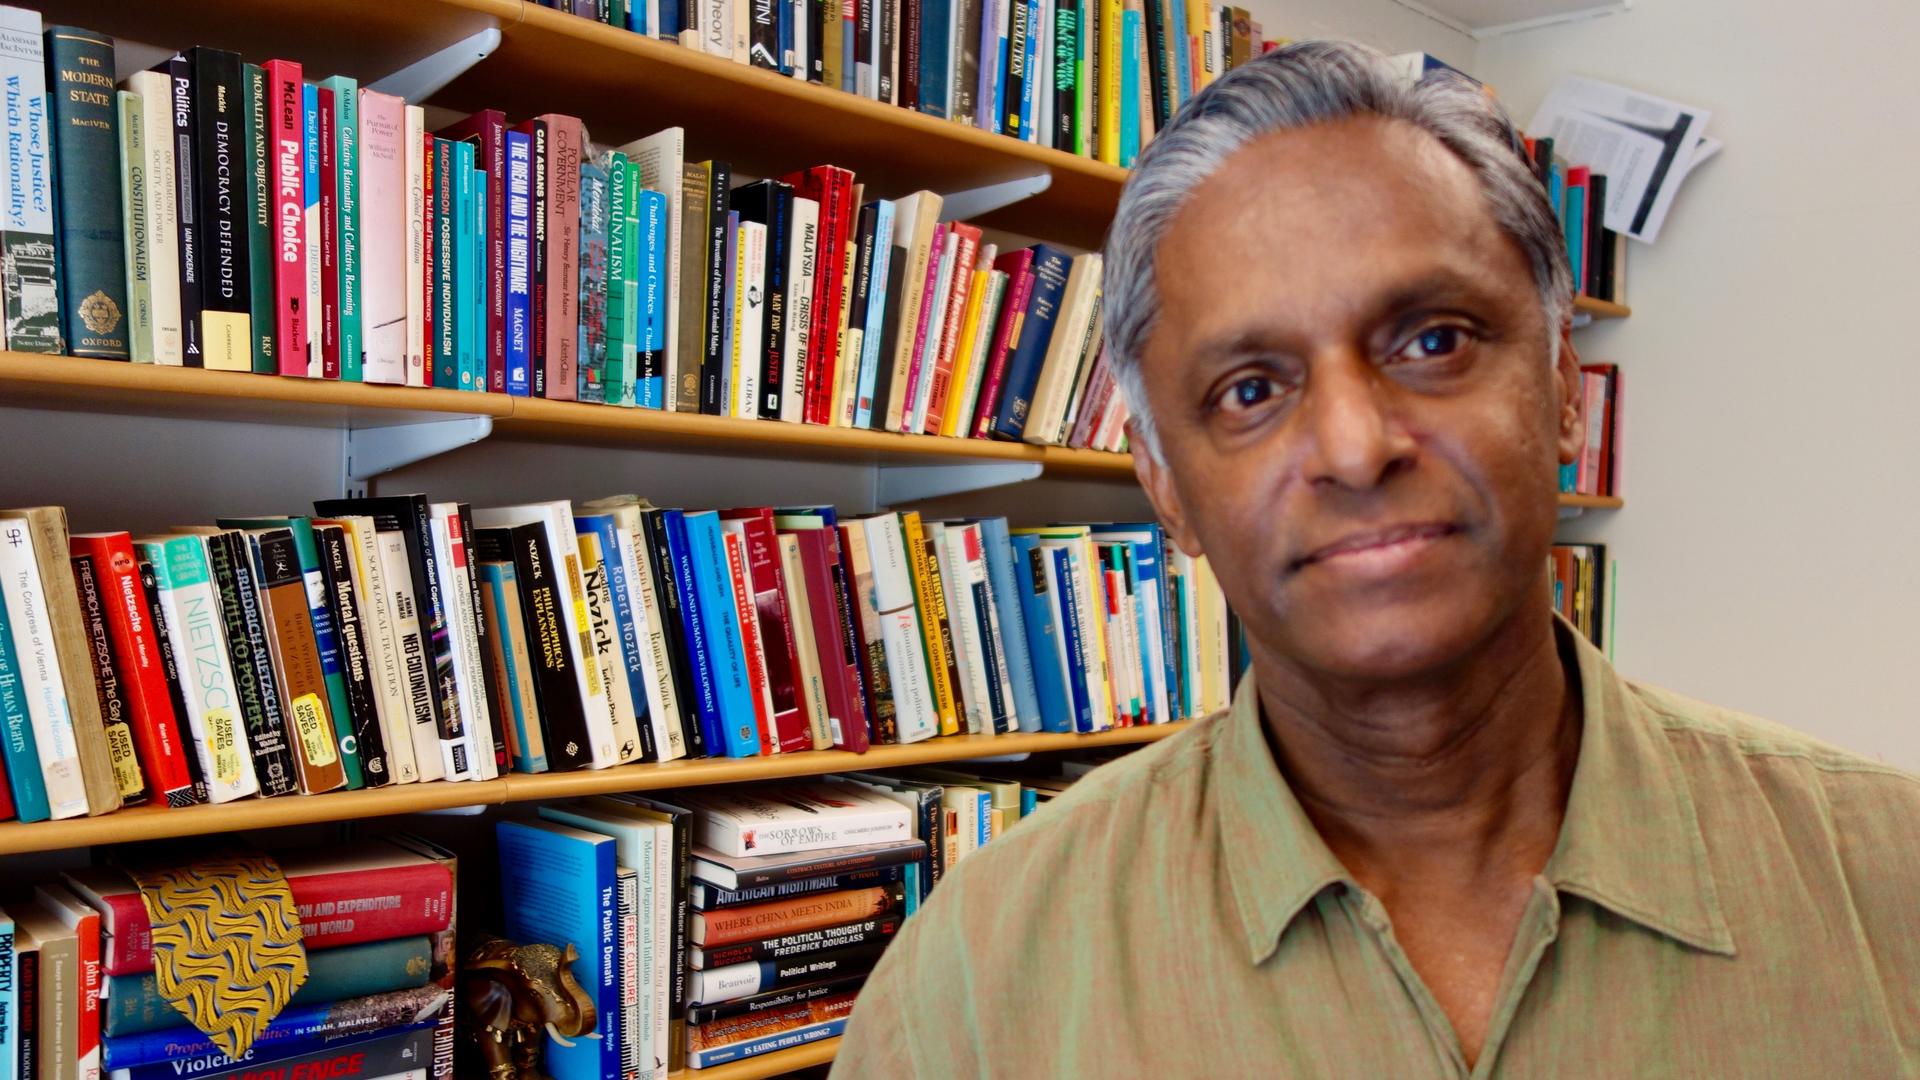 Chandran Kukathas, professor of political theory and head of the department of government at the London School of Economics